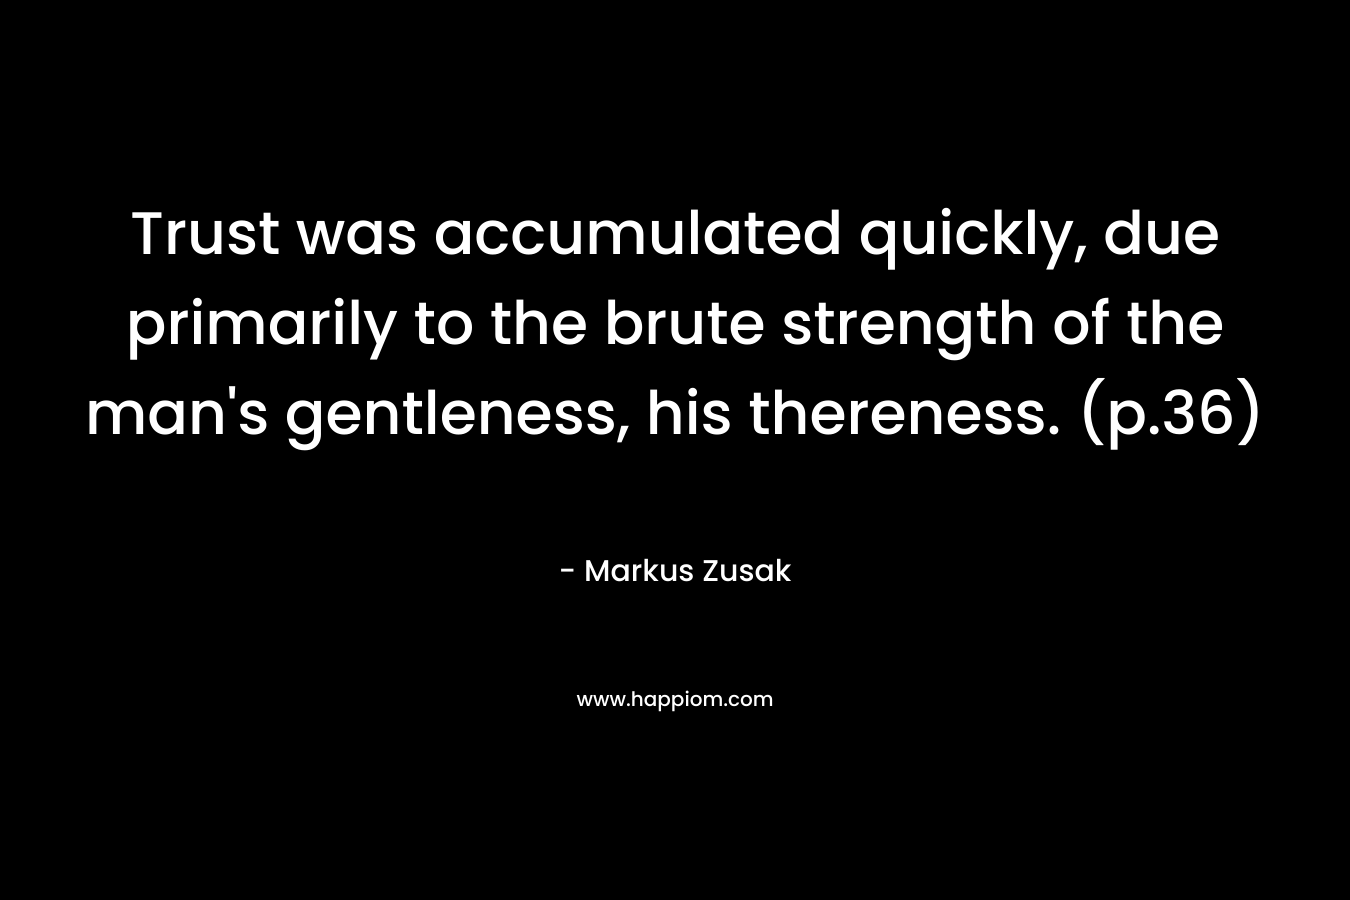 Trust was accumulated quickly, due primarily to the brute strength of the man’s gentleness, his thereness. (p.36) – Markus Zusak